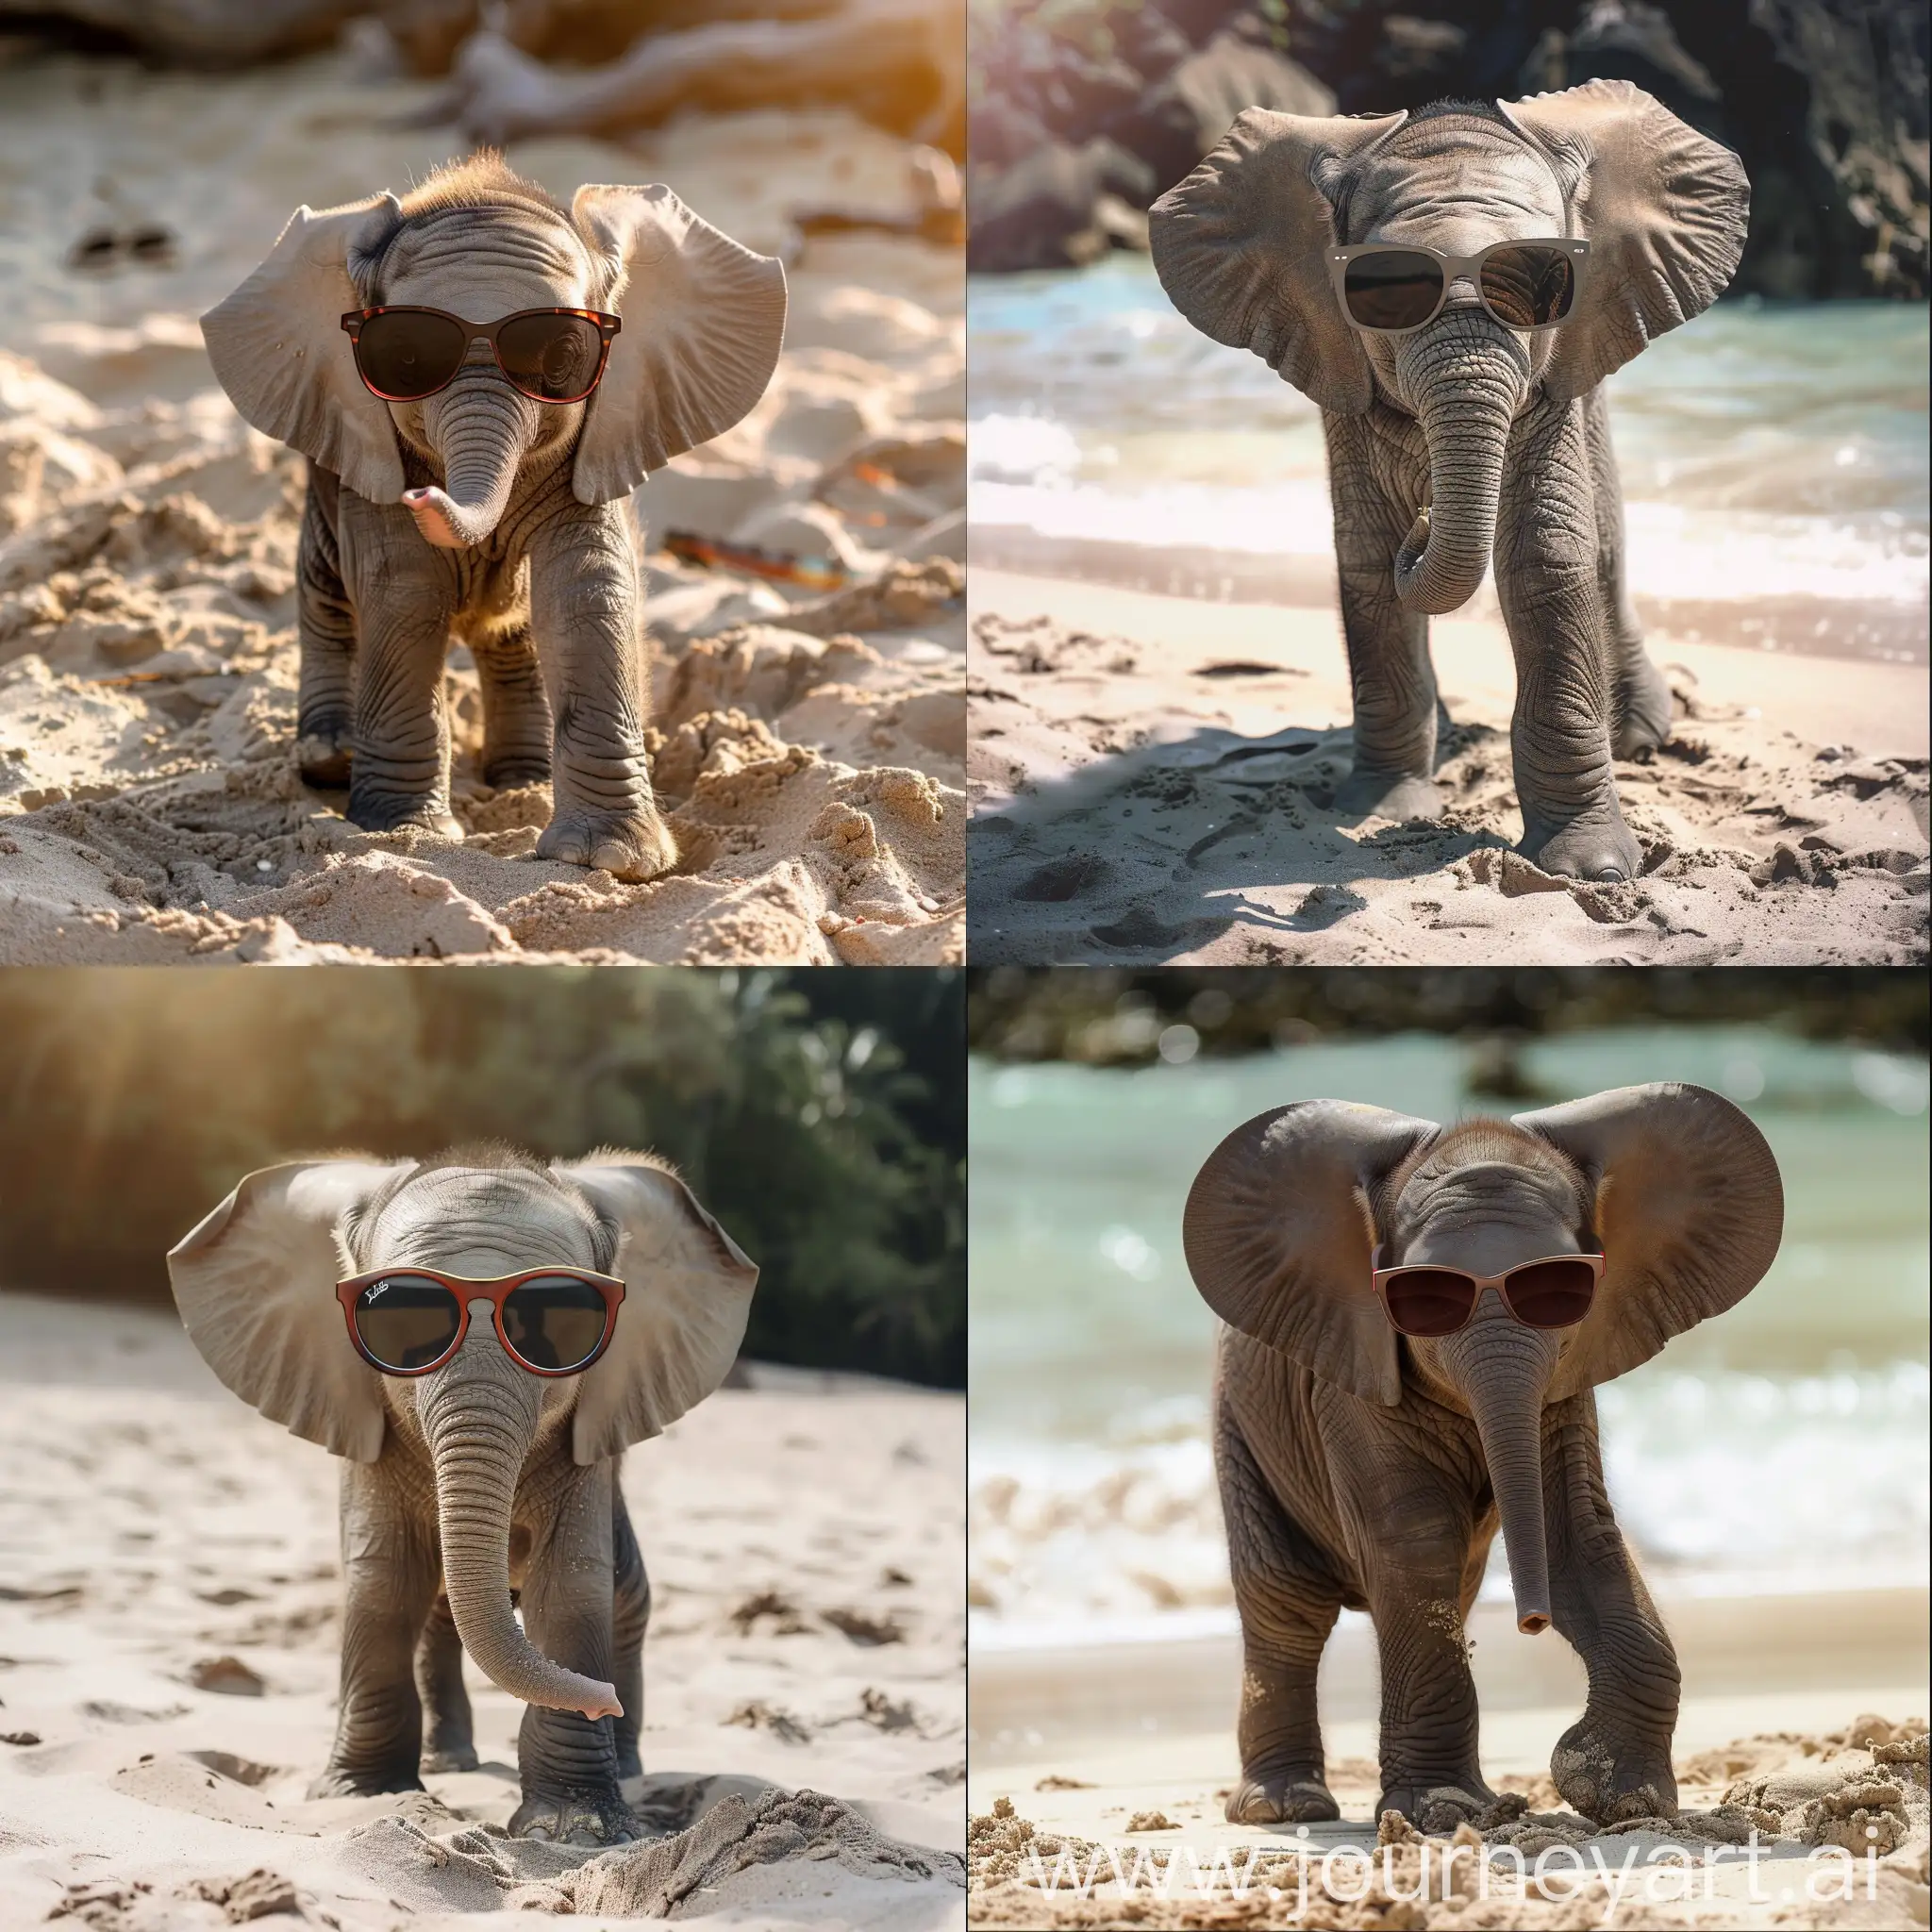 A baby elephant with sunglasses in the hawaii beach